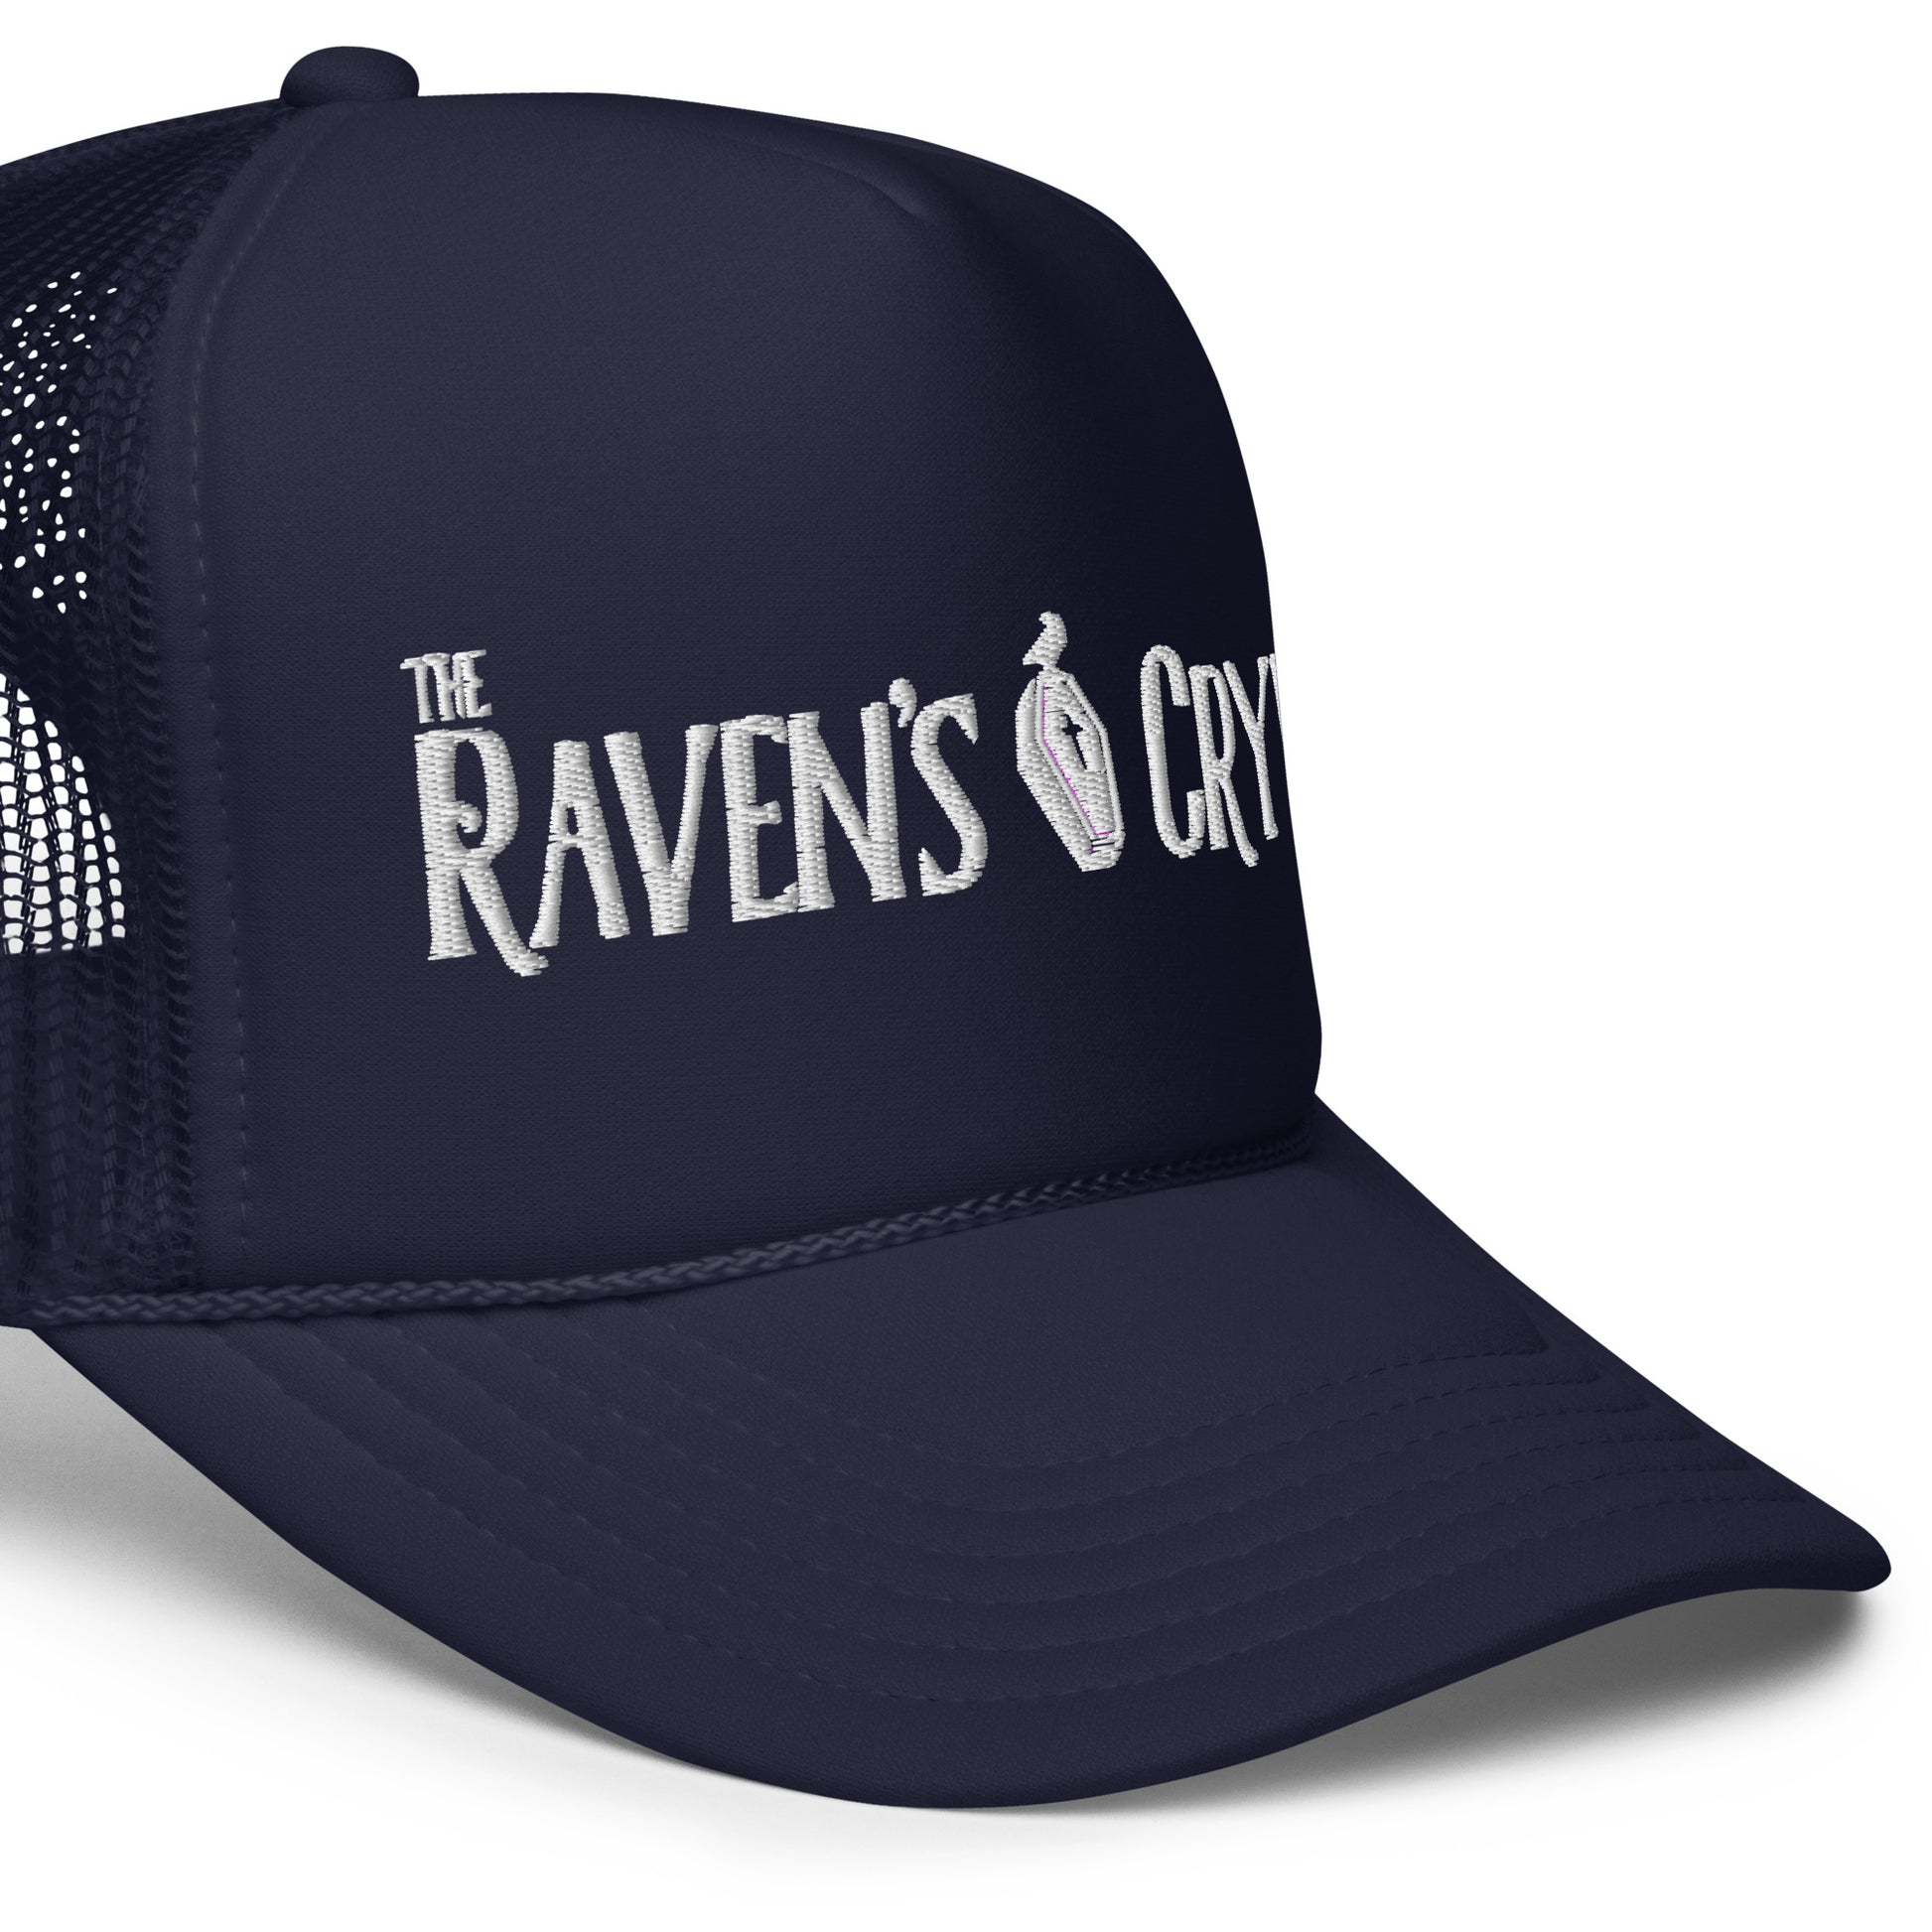 Deep Into the Darkness The Raven's Crypt - Men's t-shirt- Navy Hat with White Text